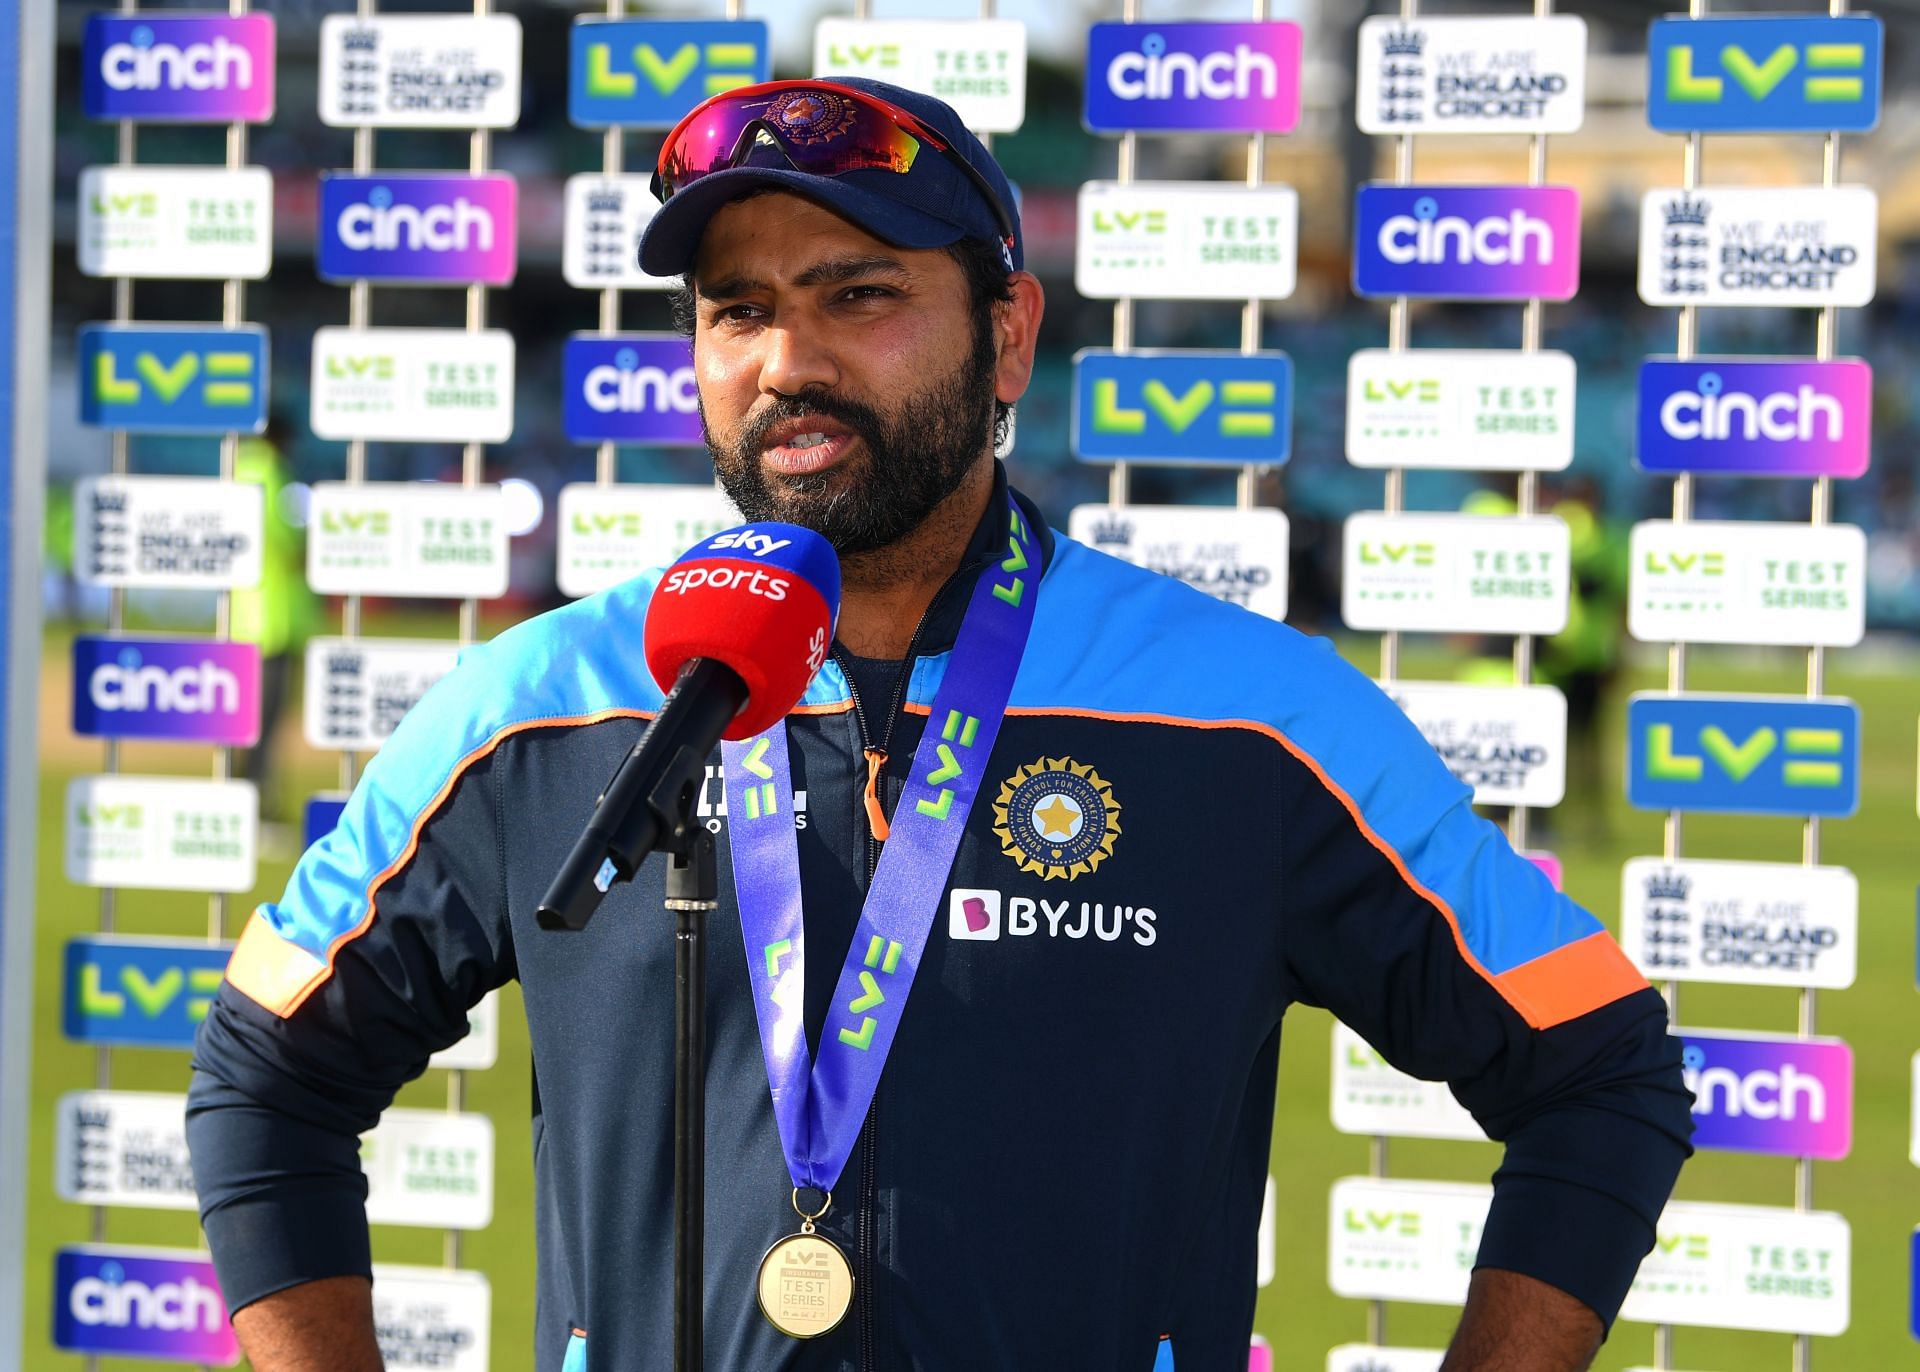 Rohit Sharma has recovered from COVID-19 and will lead India. (Credits: Getty)